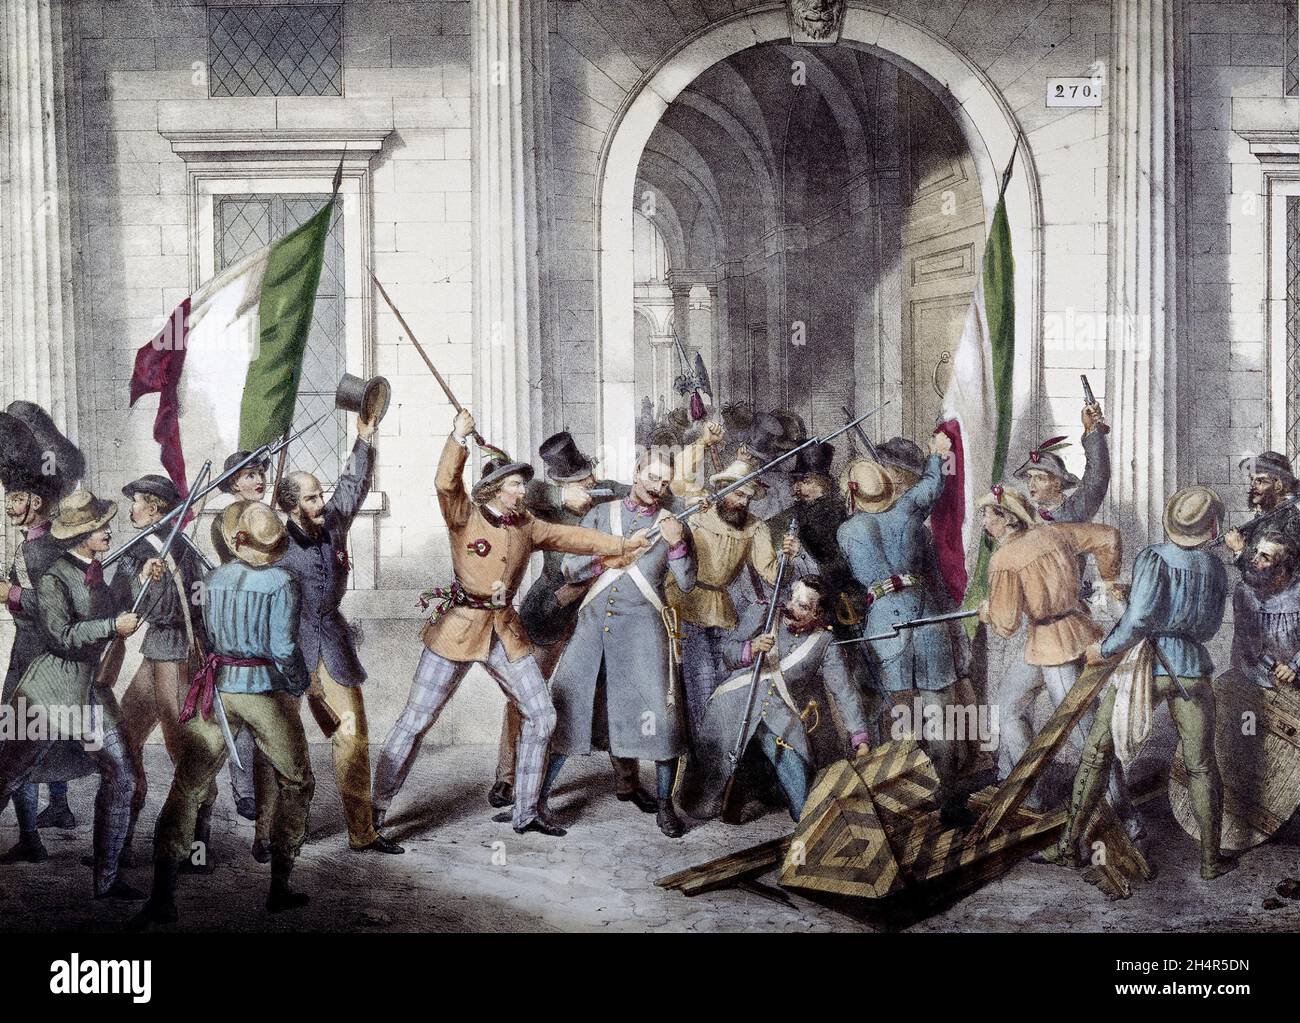 Risorgimento, first Italian war of independence: 'The people take the government palace in Milan (during the Five Days of Milan on 18/03/1848)' Stock Photo